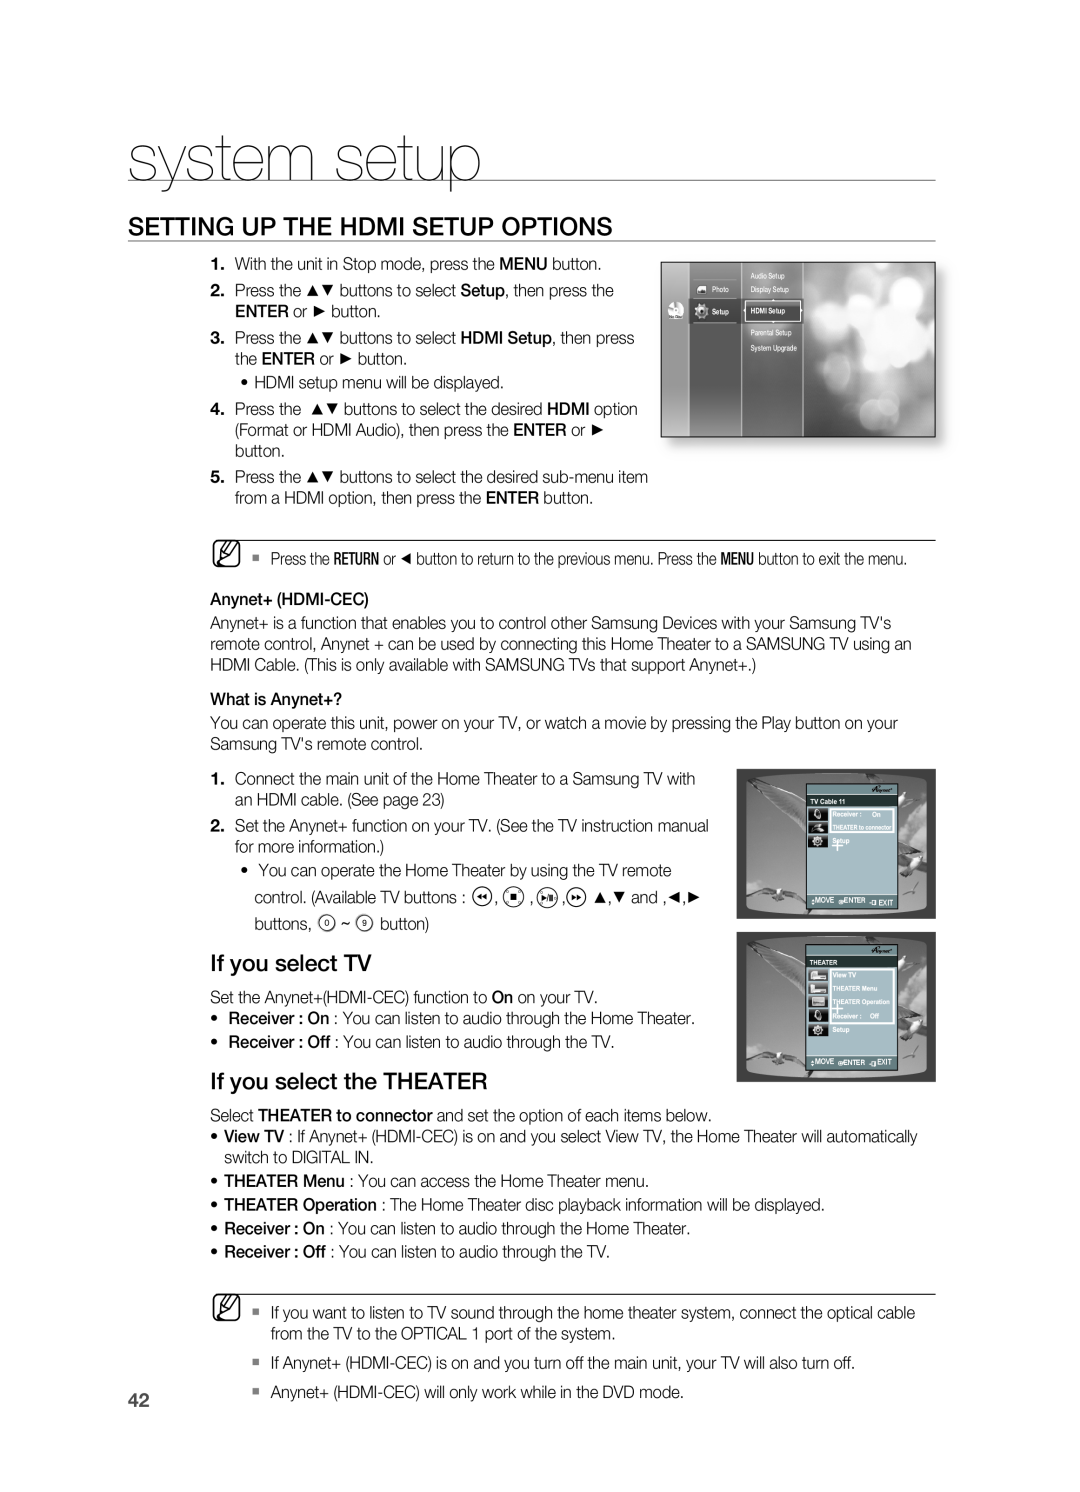 Samsung HT-BD2S manual SETTIng UP THE HDMI SETUP OPTIOnS, If you select TV, If you select the THEATER, system setup 